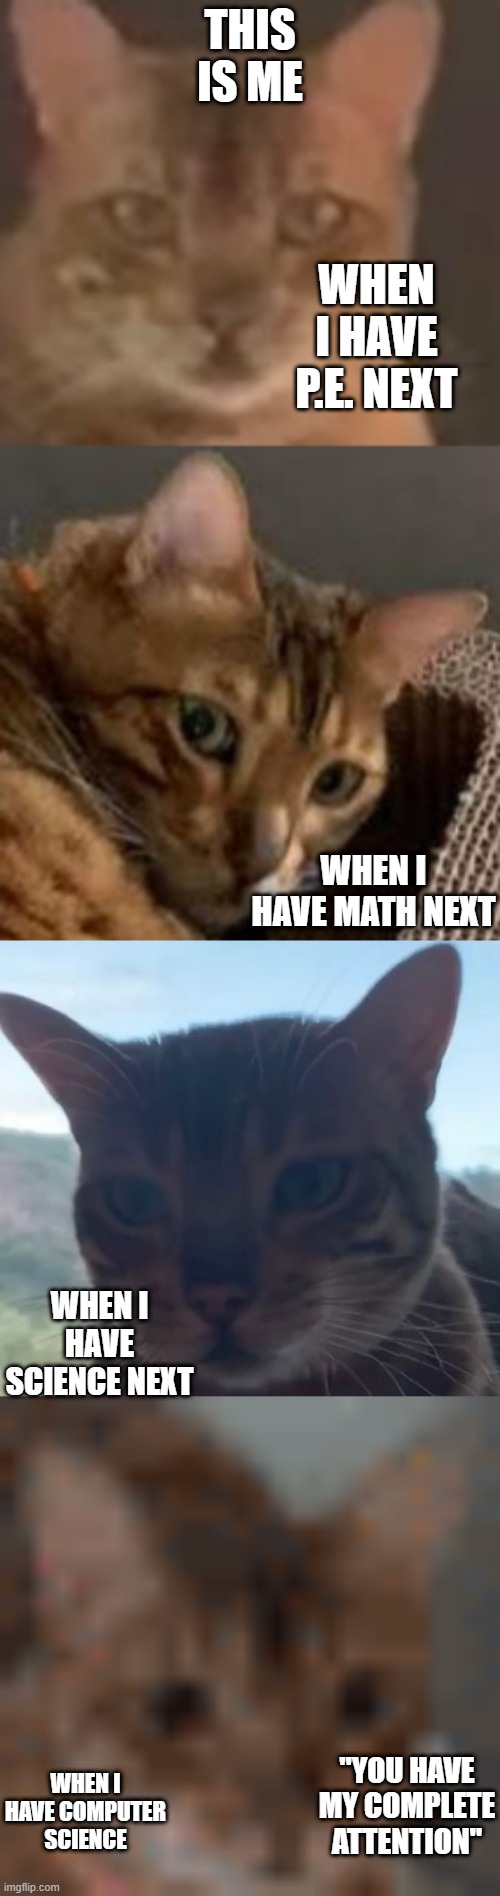 When I have School Cat Version | THIS IS ME; WHEN I HAVE P.E. NEXT; WHEN I HAVE MATH NEXT; WHEN I HAVE SCIENCE NEXT; "YOU HAVE MY COMPLETE ATTENTION"; WHEN I HAVE COMPUTER SCIENCE | image tagged in cat,school | made w/ Imgflip meme maker